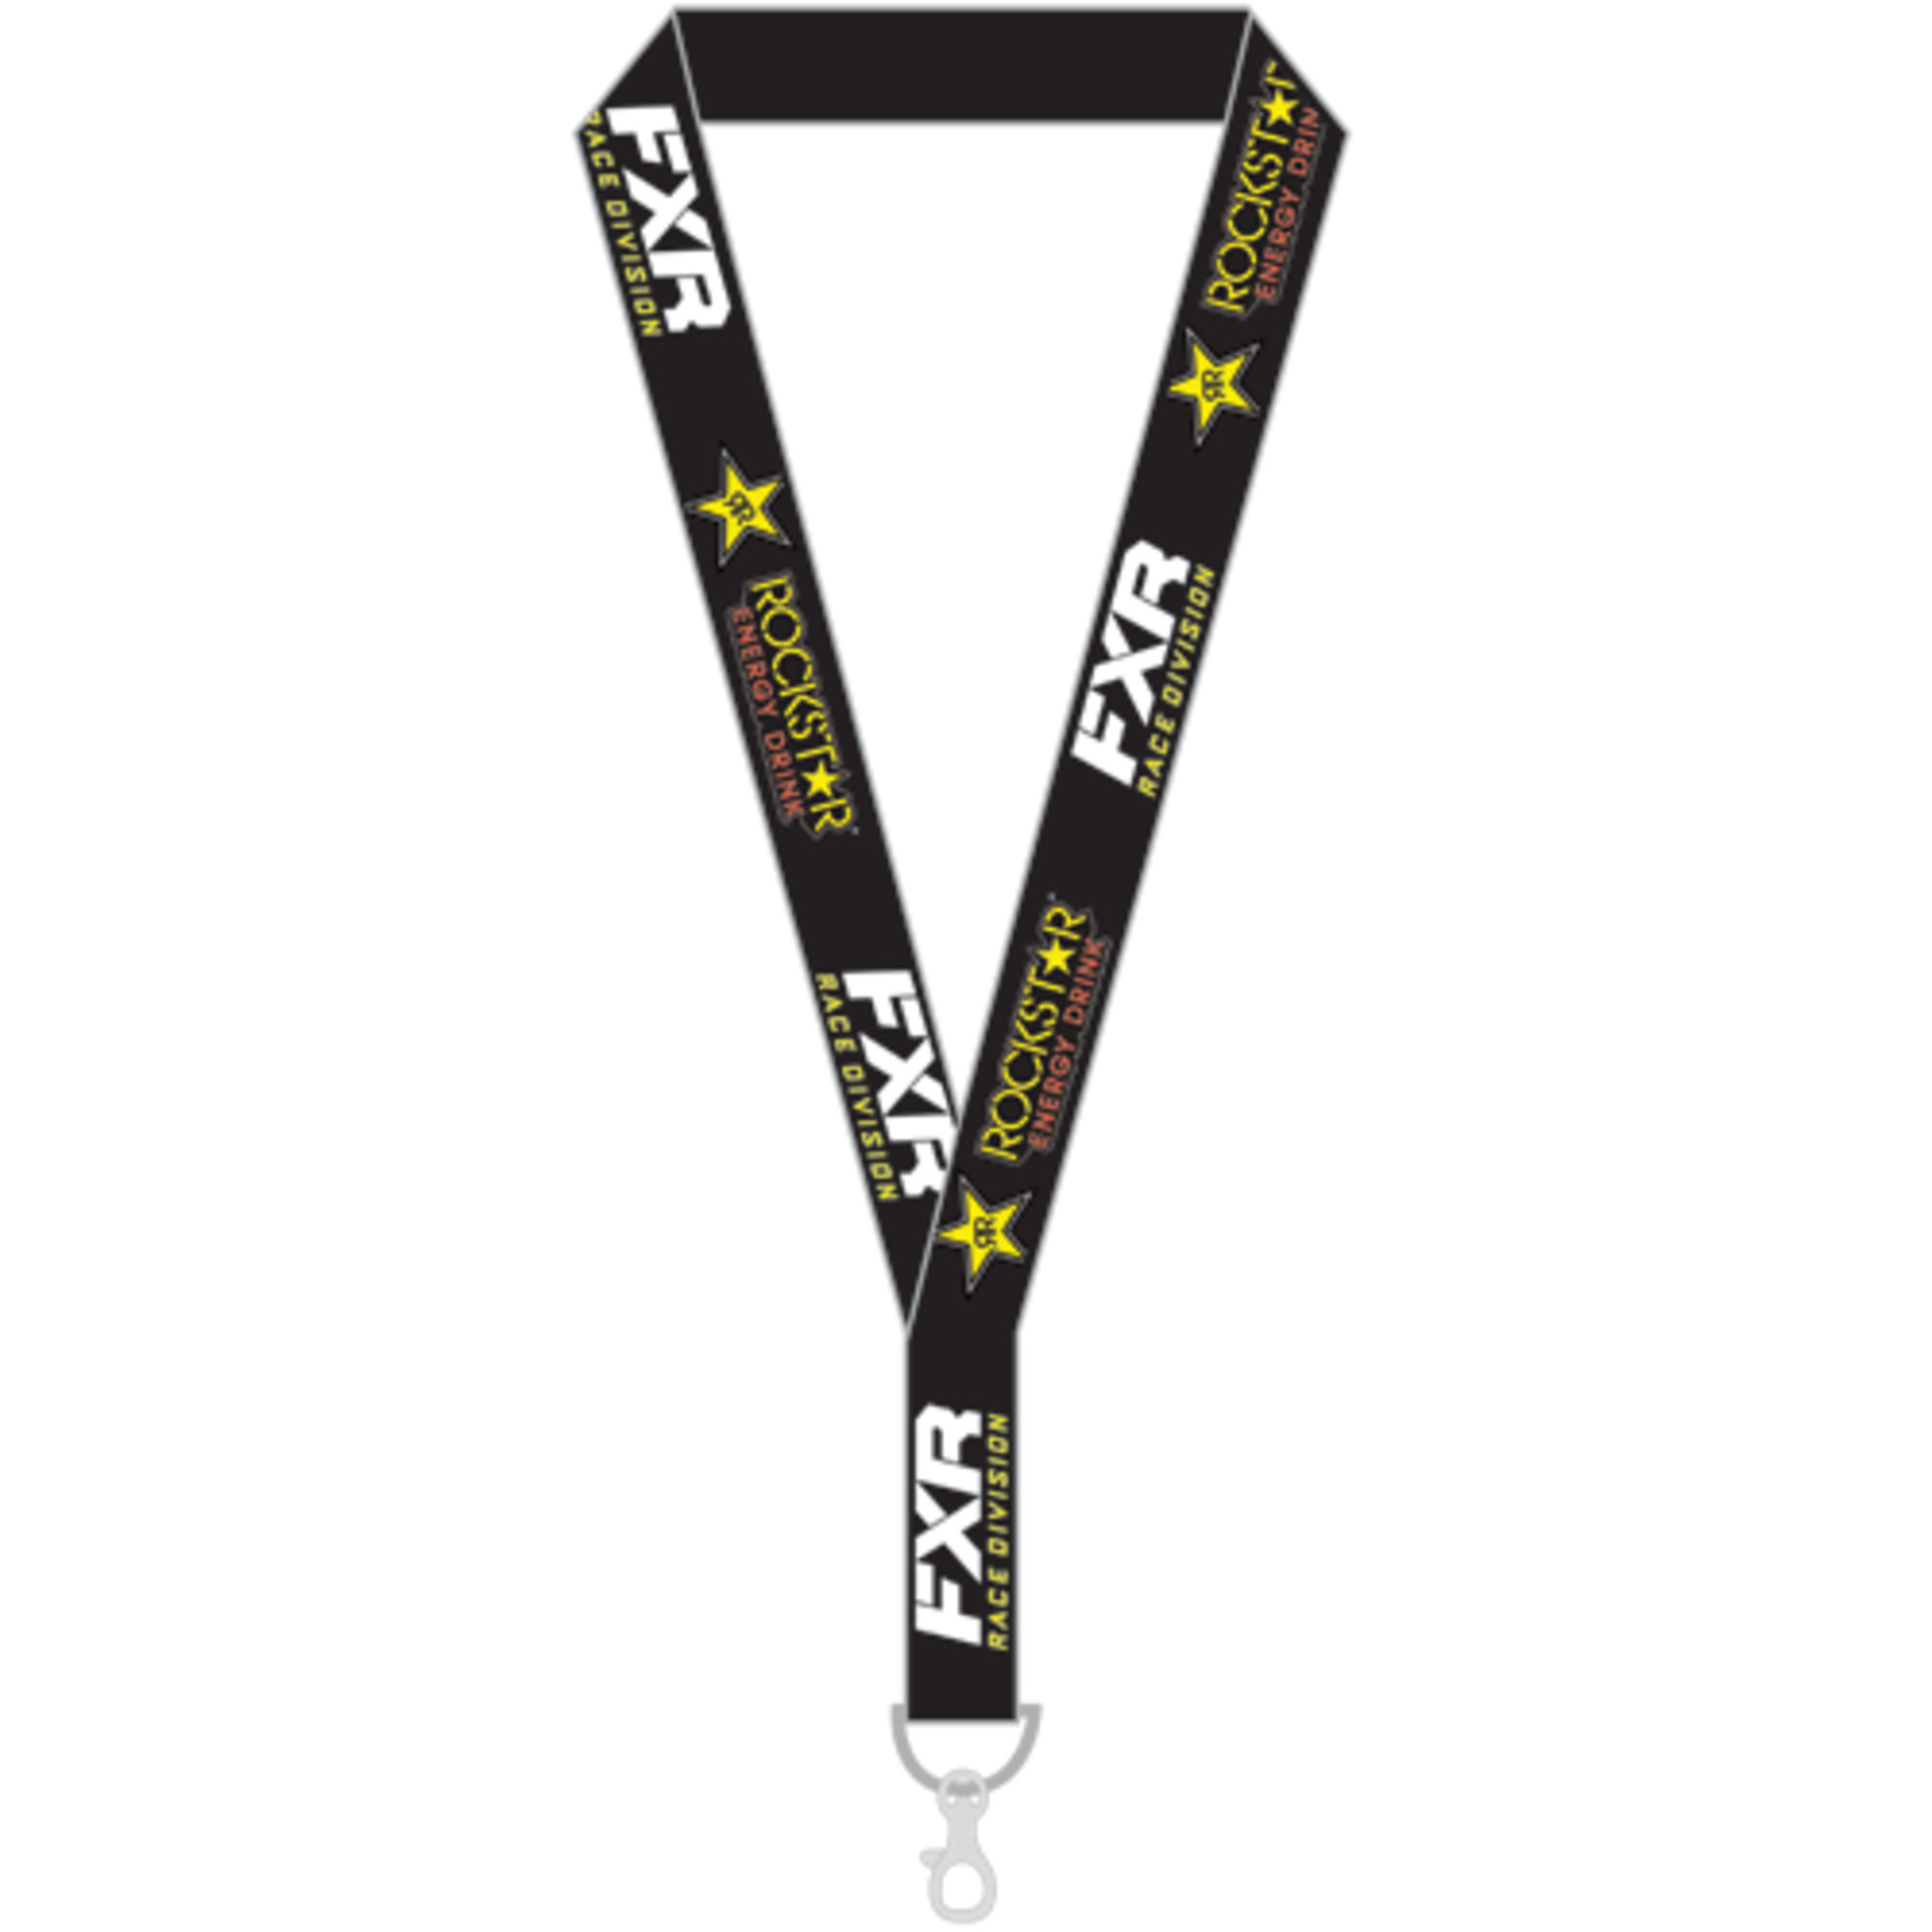 fxr racing accessories adult race division lanyard